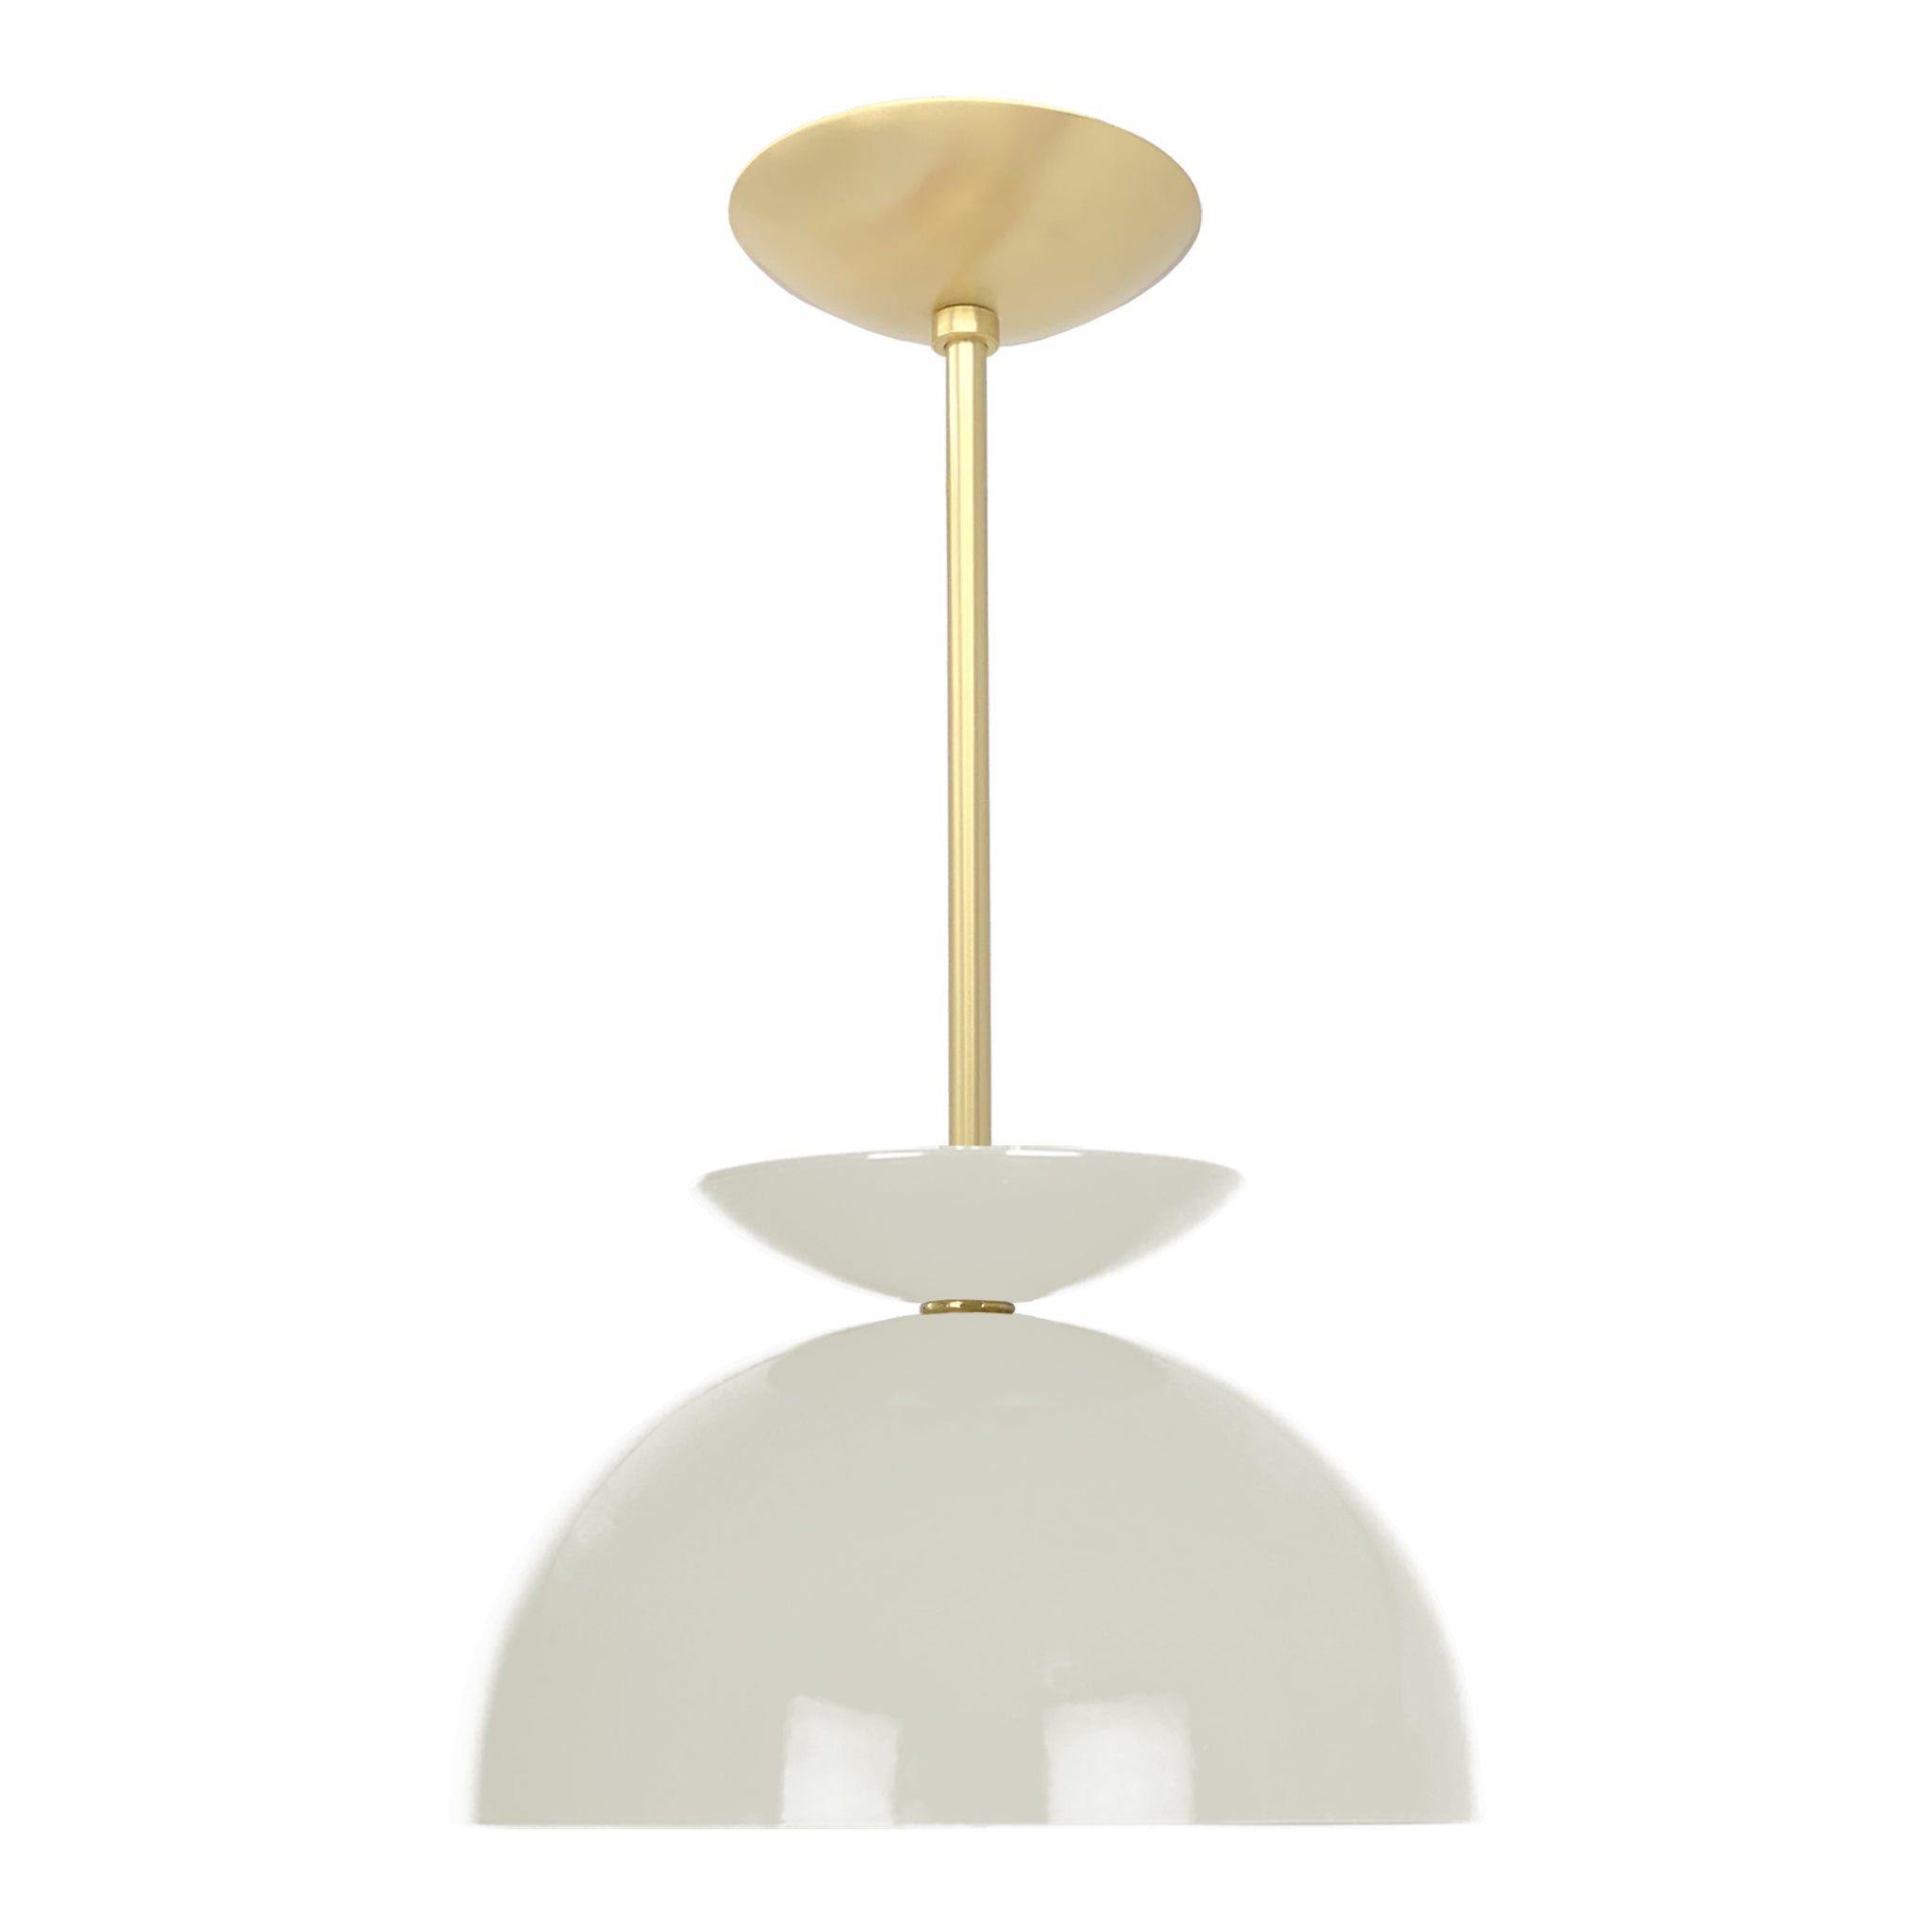 Brass and bone color Echo pendant 12" Dutton Brown lighting